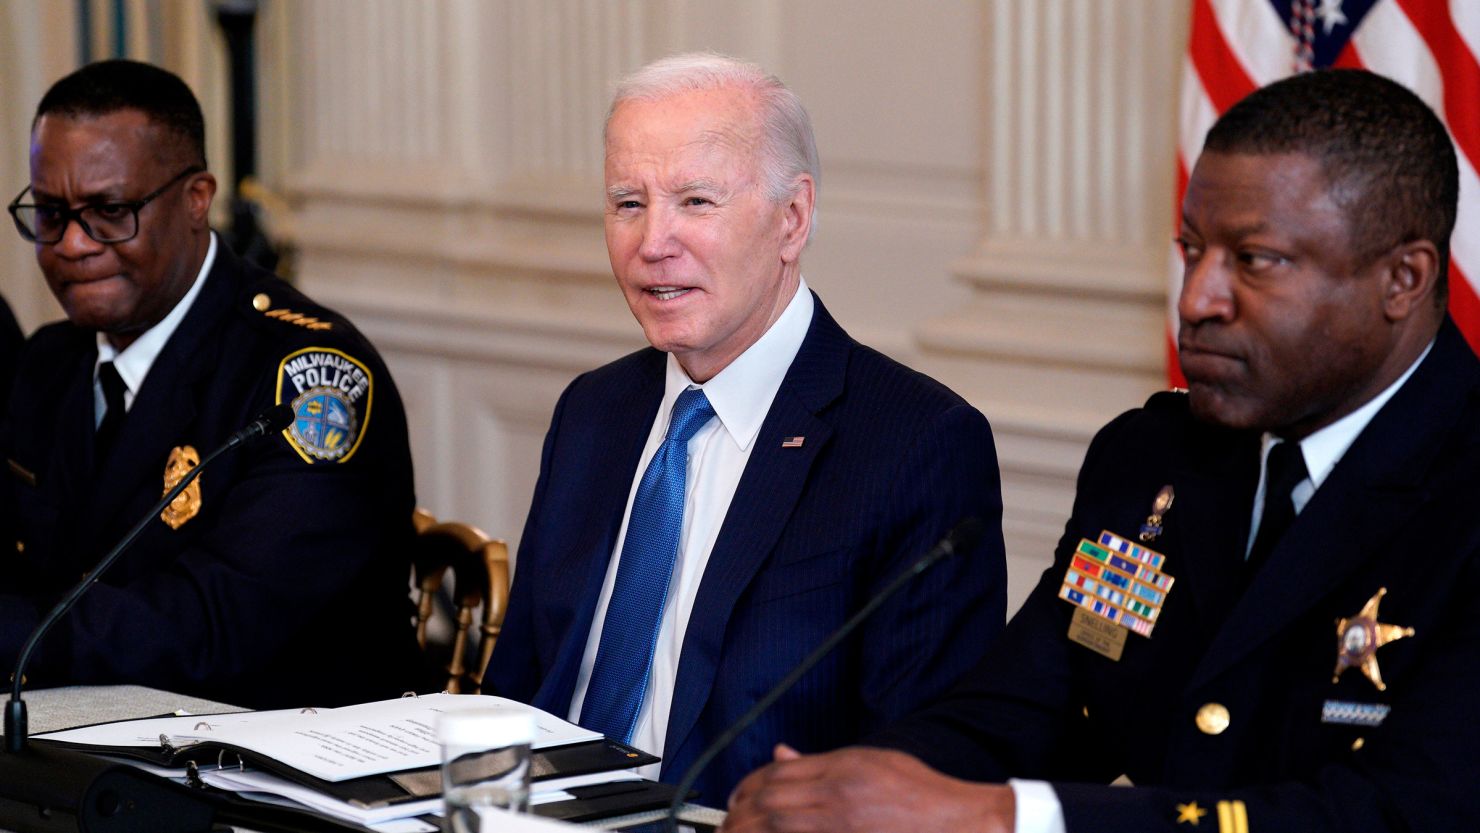 President Joe Biden speaks to the media following his annual physical during an event in the State Dining Room of the White House in Washington, DC, on Wednesday, February 28. 